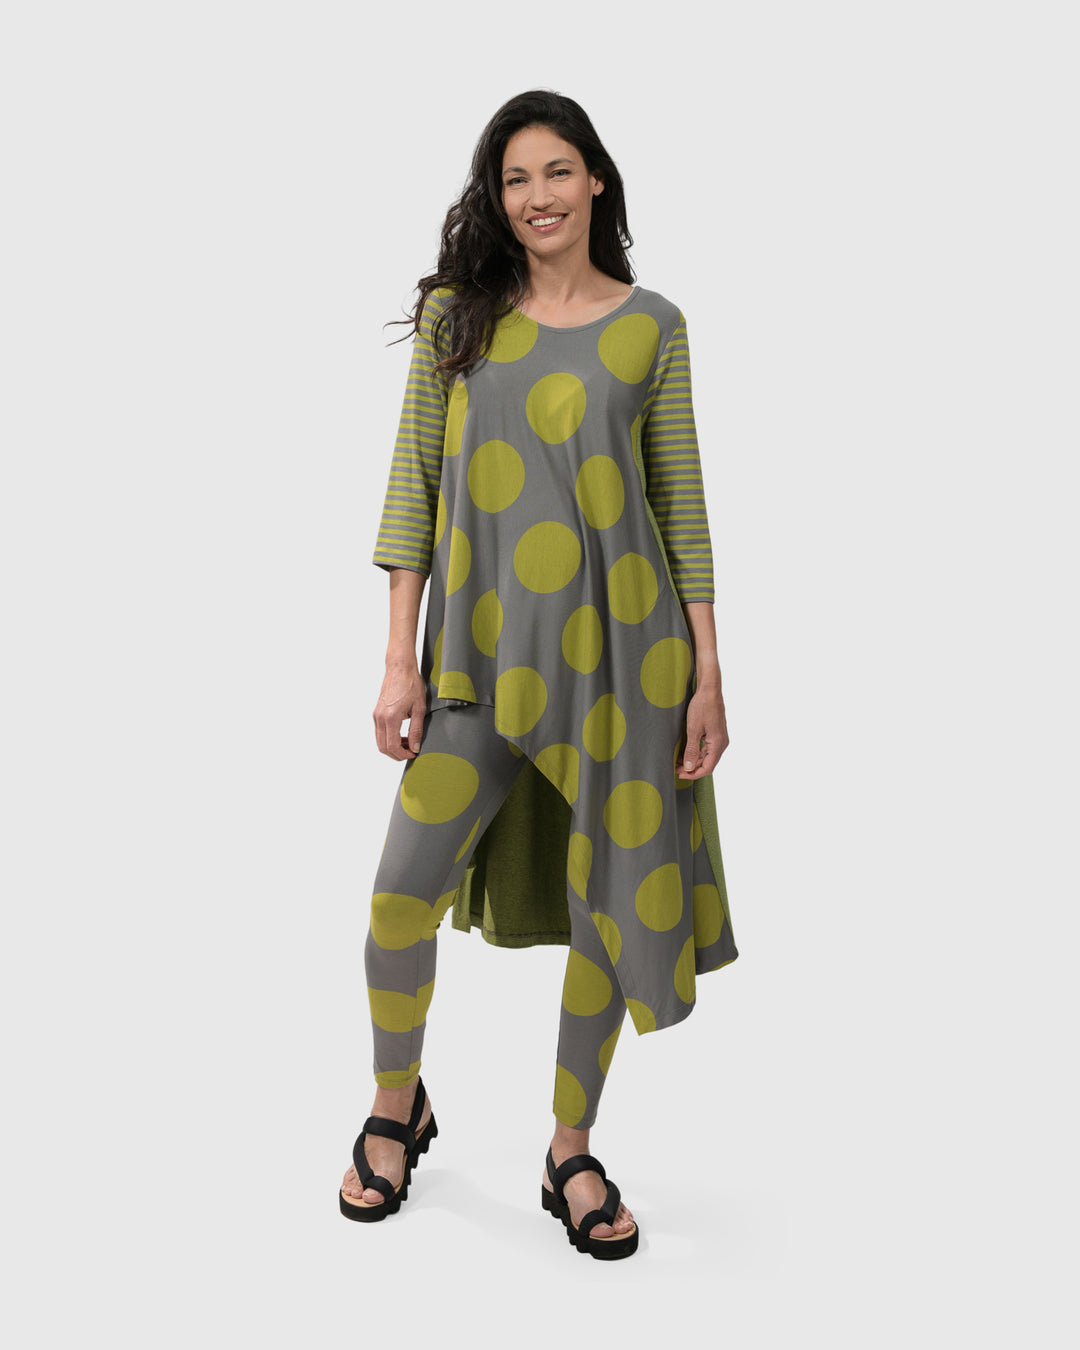 CITY SIZZLE SWING TUNIC TOP, LIME